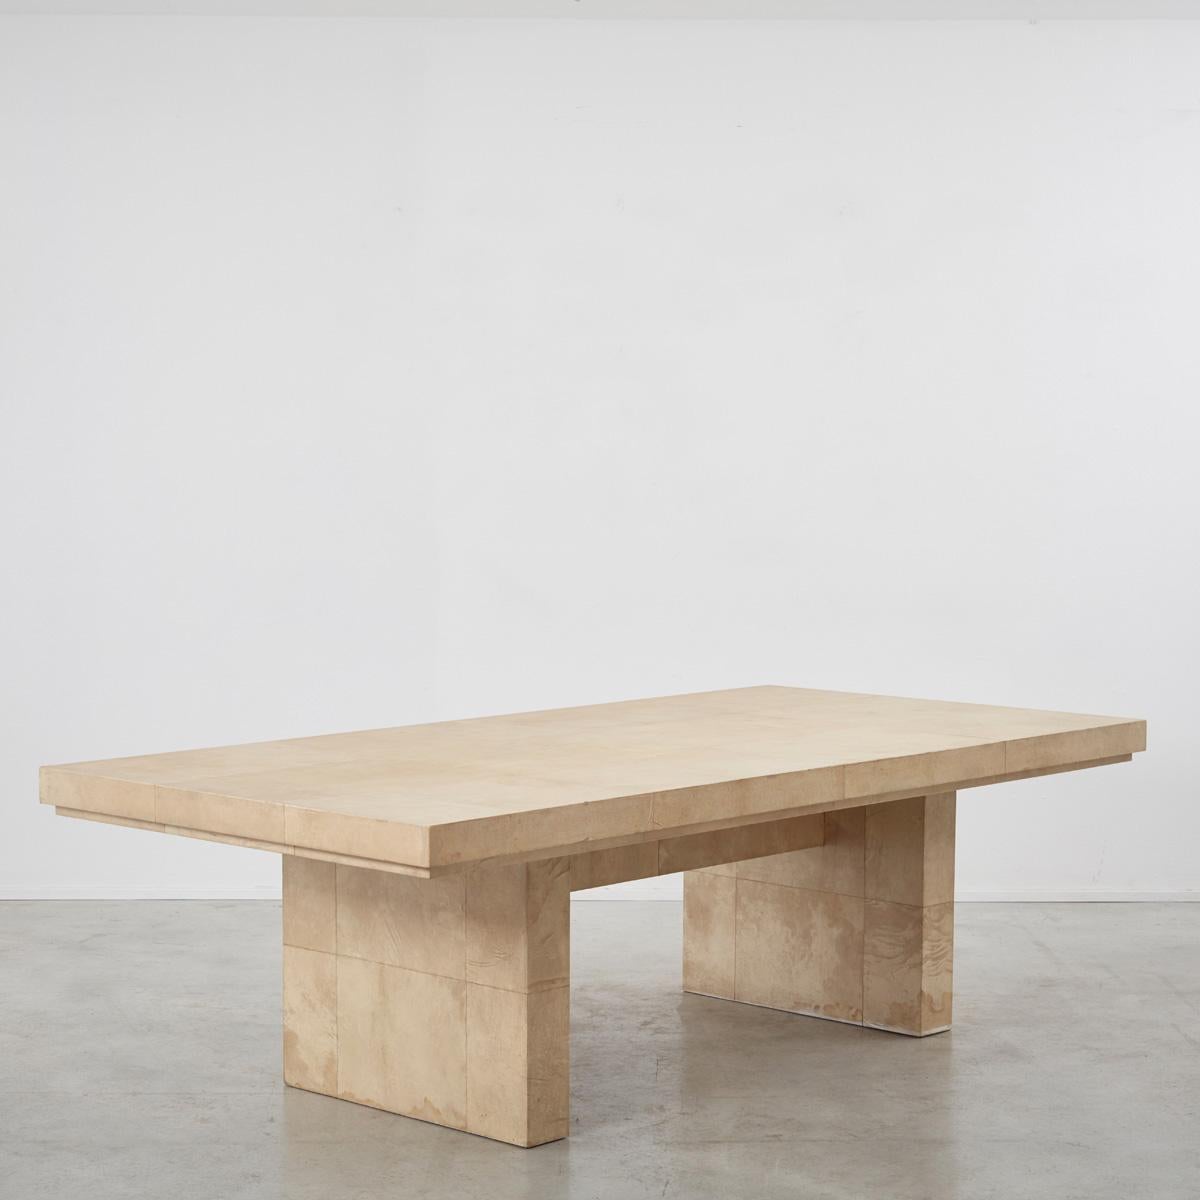 This parchment table attributed to Karl Springer, is monolithic with grand proportions, seating up to 12. A designer of luxury furniture and objects, Springer (born Berlin, 1931) cut his cloth as a bookbinder and window dresser before emigrating to